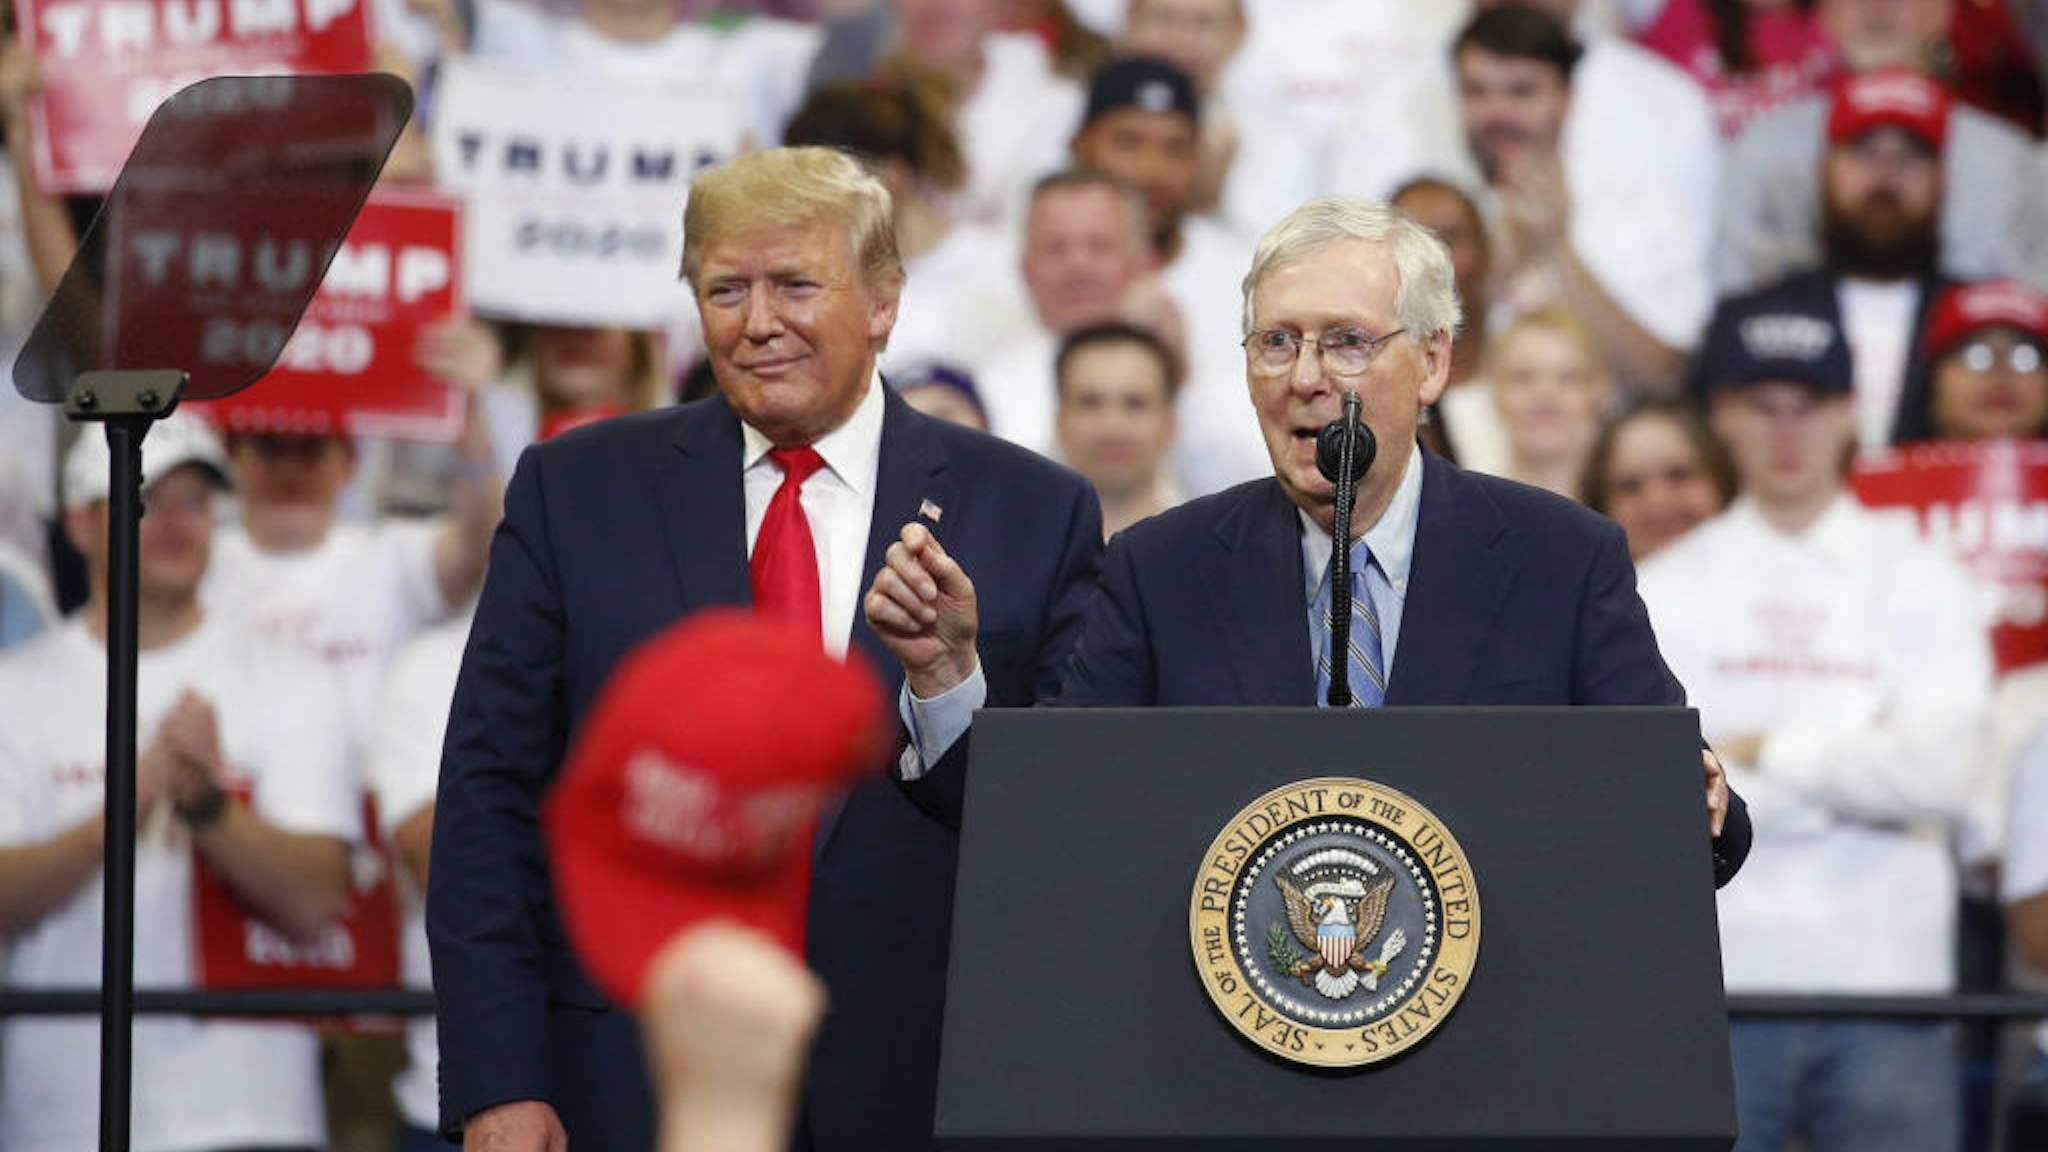 Senate Majority Leader Mitch McConnell, a Republican from Kentucky, right, speaks during a rally with U.S. President Trump in Lexington, Kentucky, U.S., on Monday, Nov. 4, 2019. President Trump encouraged his supporters in Kentucky to vote Tuesday to re-elect the state’s Republican governor, declaring it would send a message to congressional Democrats conducting an impeachment inquiry. Photographer: Luke Sharrett/Bloomberg